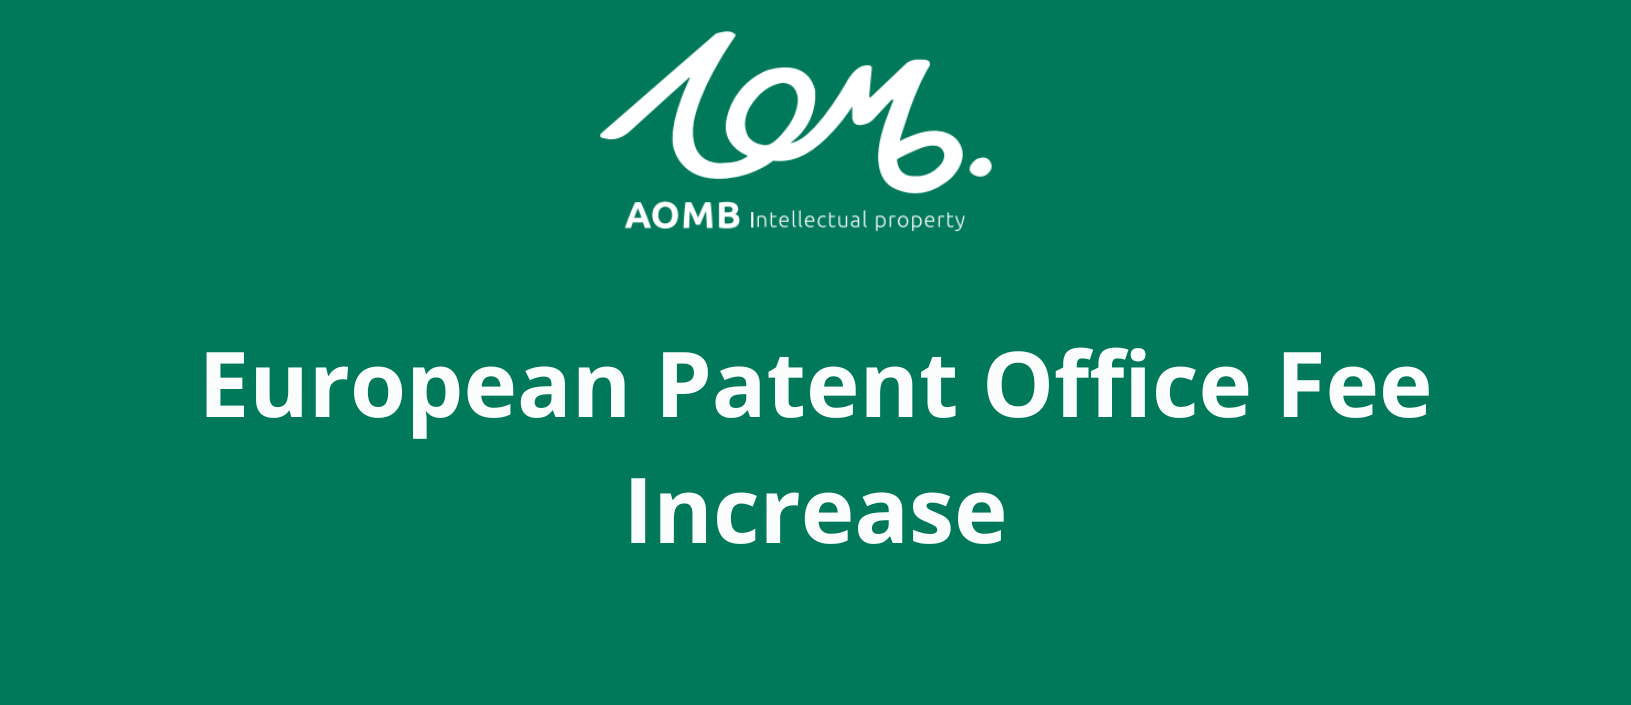 <strong>European Patent Office Fee Increase</strong>